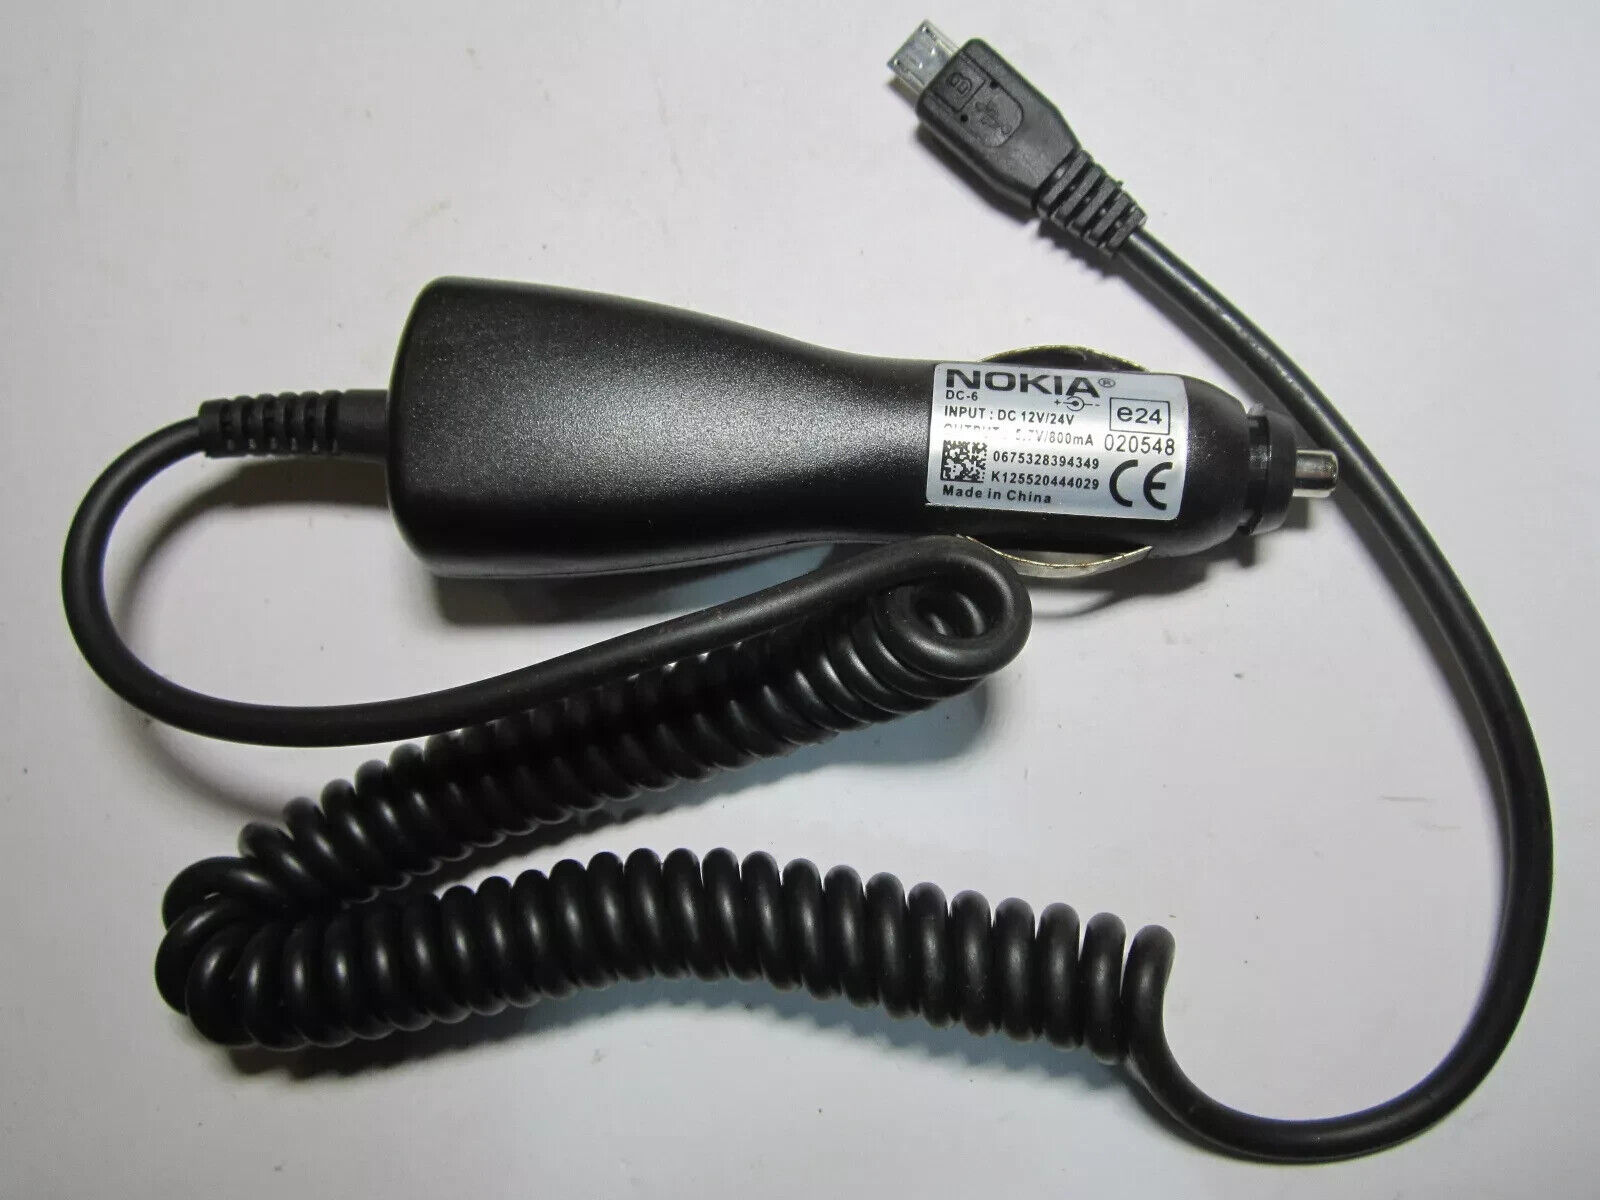 Nokia Phone Owners Genuine DC-6 Car Charger (Micro-USB) - Lumia, 6300